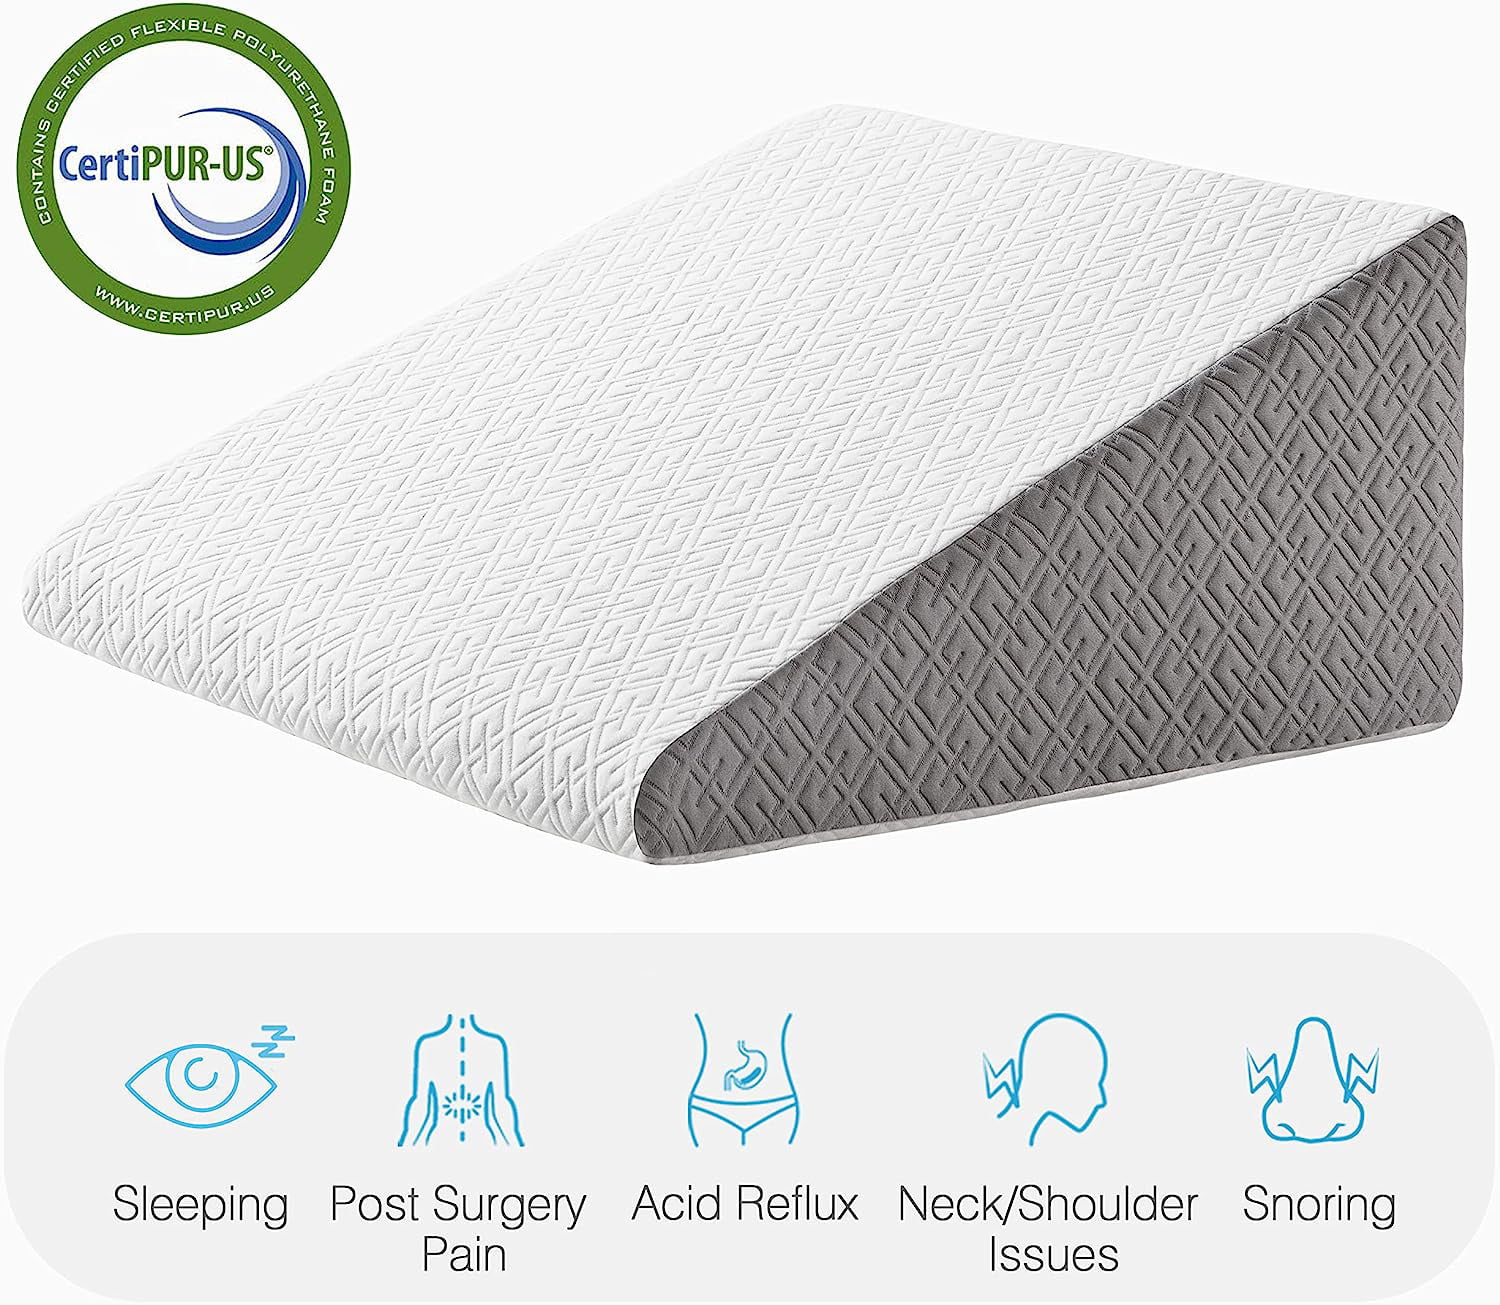 UBBCARE Orthopedic Bed Wedge Pillow Set, Post Surgery Memory Foam Wedge  Pillows for Sleeping, Back and Leg Support, Adjustable Triangle Pillow  Wedge